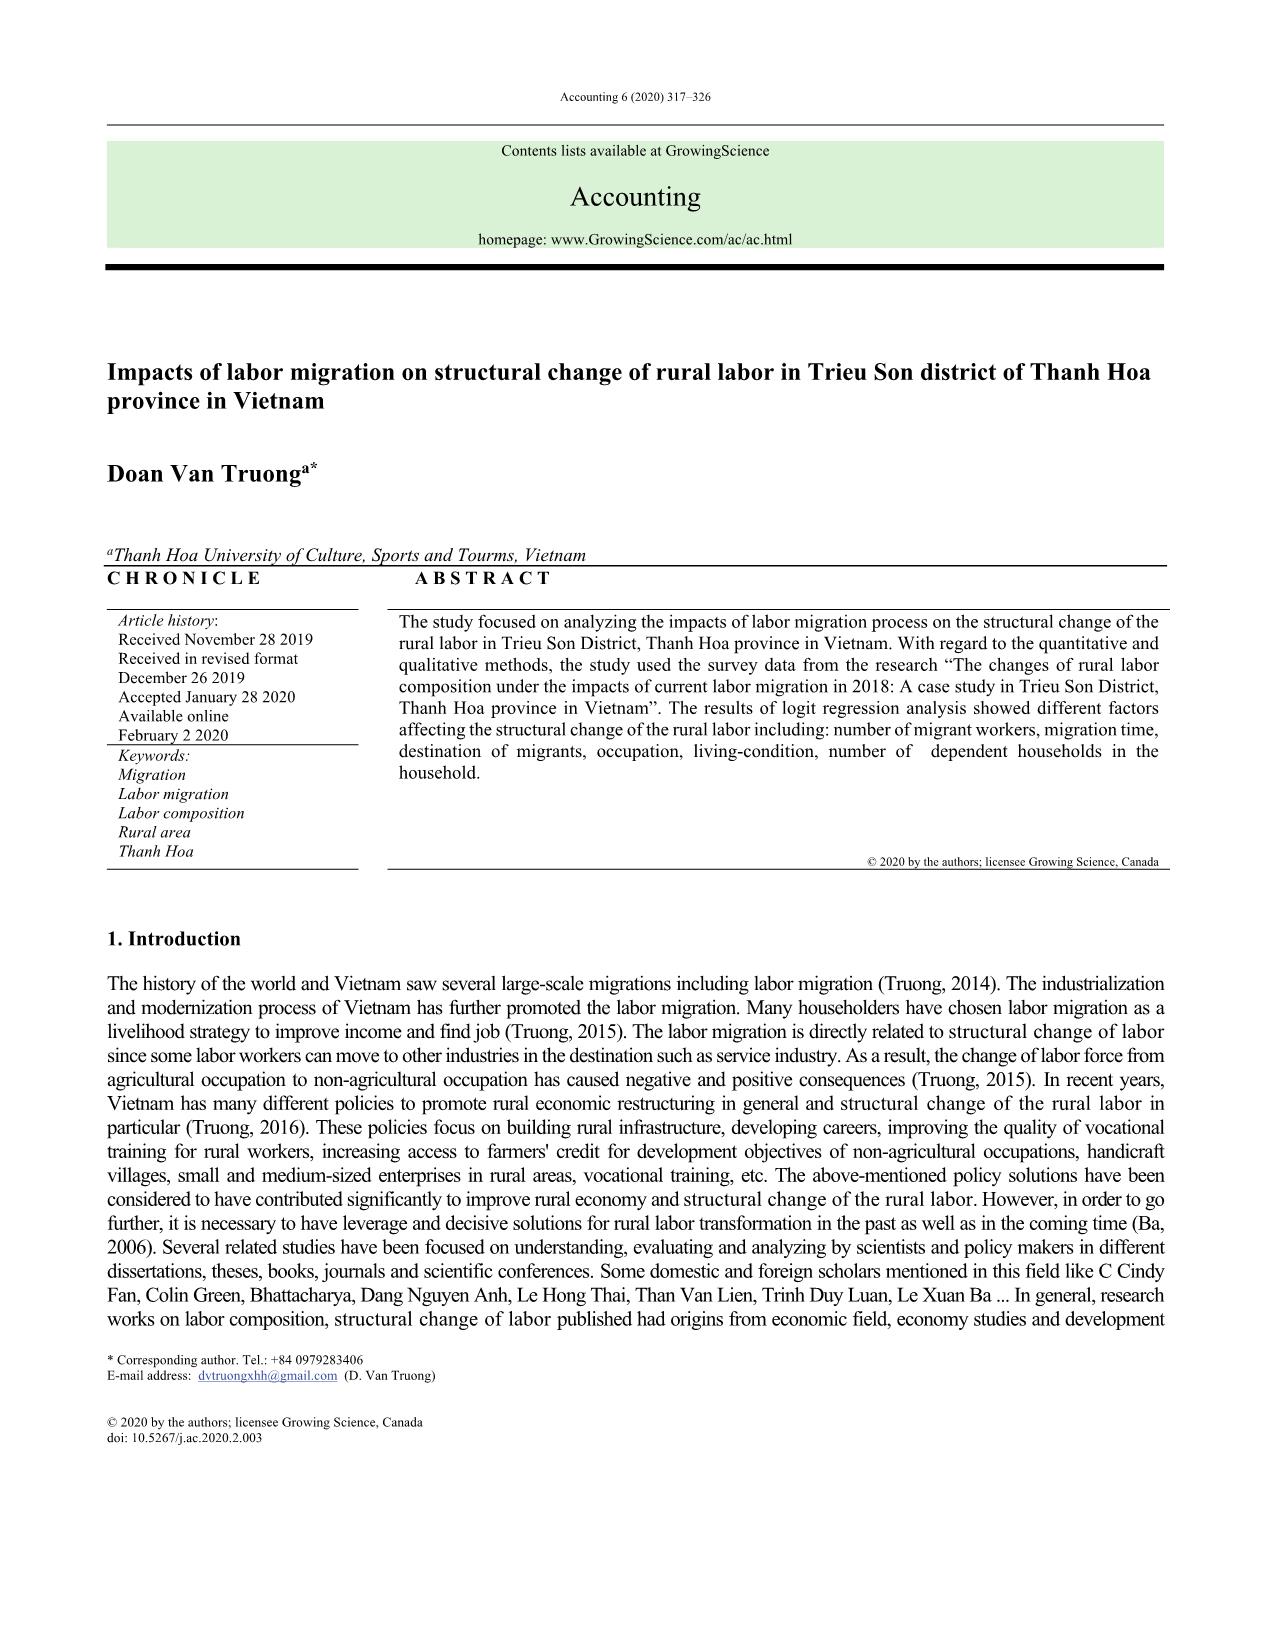 Impacts of labor migration on structural change of rural labor in Trieu Son district of Thanh Hoa province in Vietnam trang 1